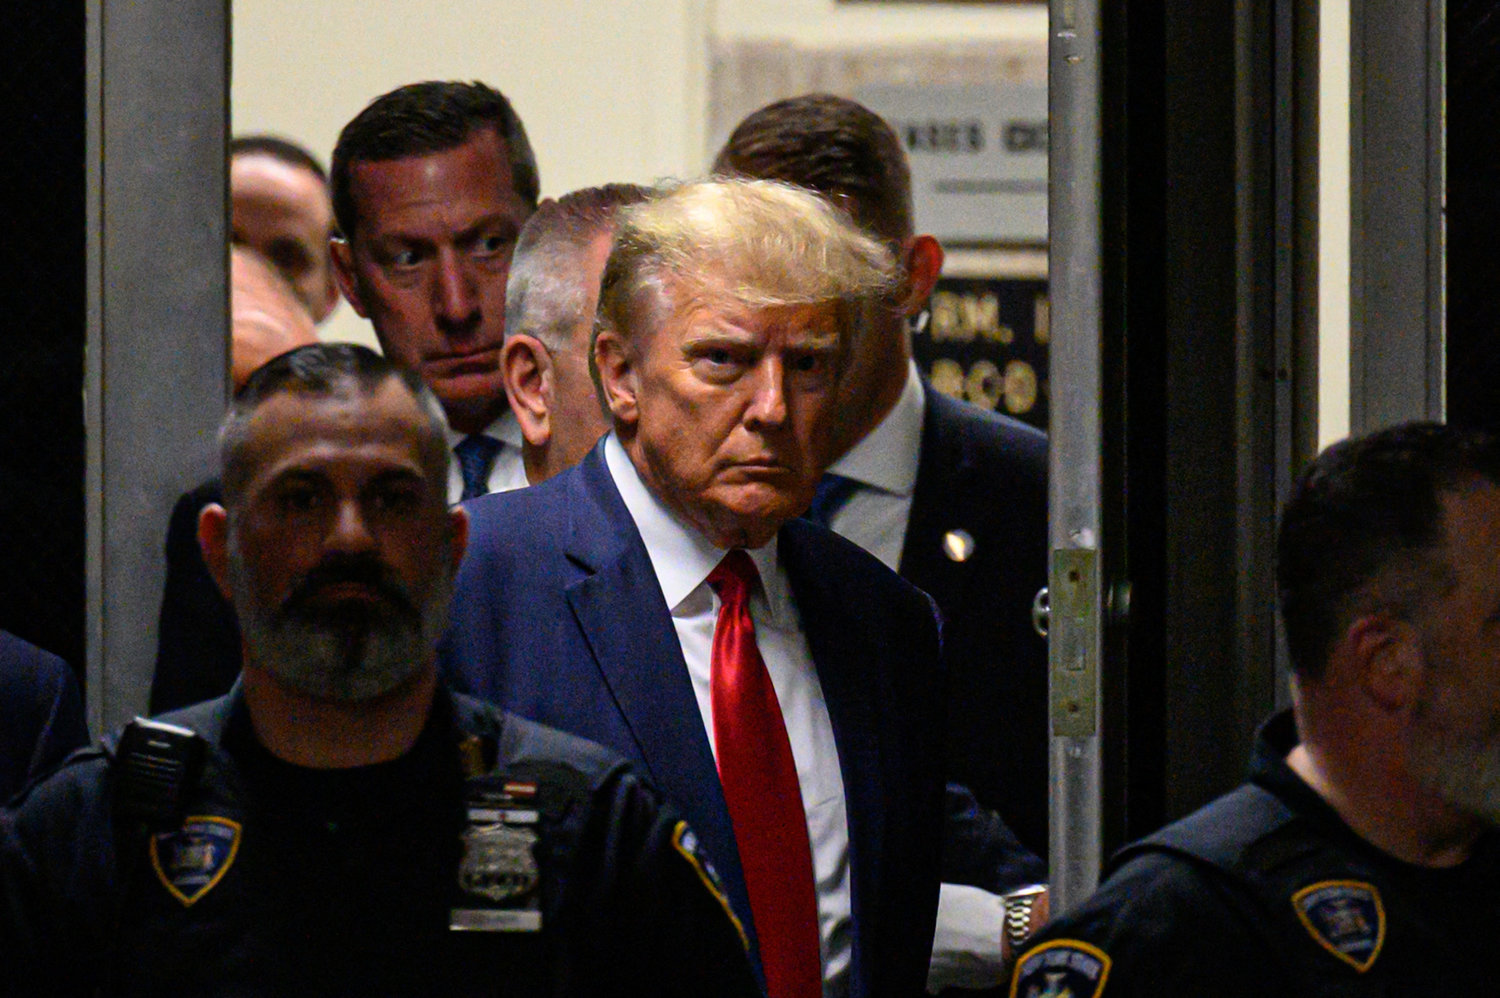 Former U.S. President Donald Trump makes his way inside the Manhattan Criminal Courthouse in New York on Tuesday, April 4, 2023.